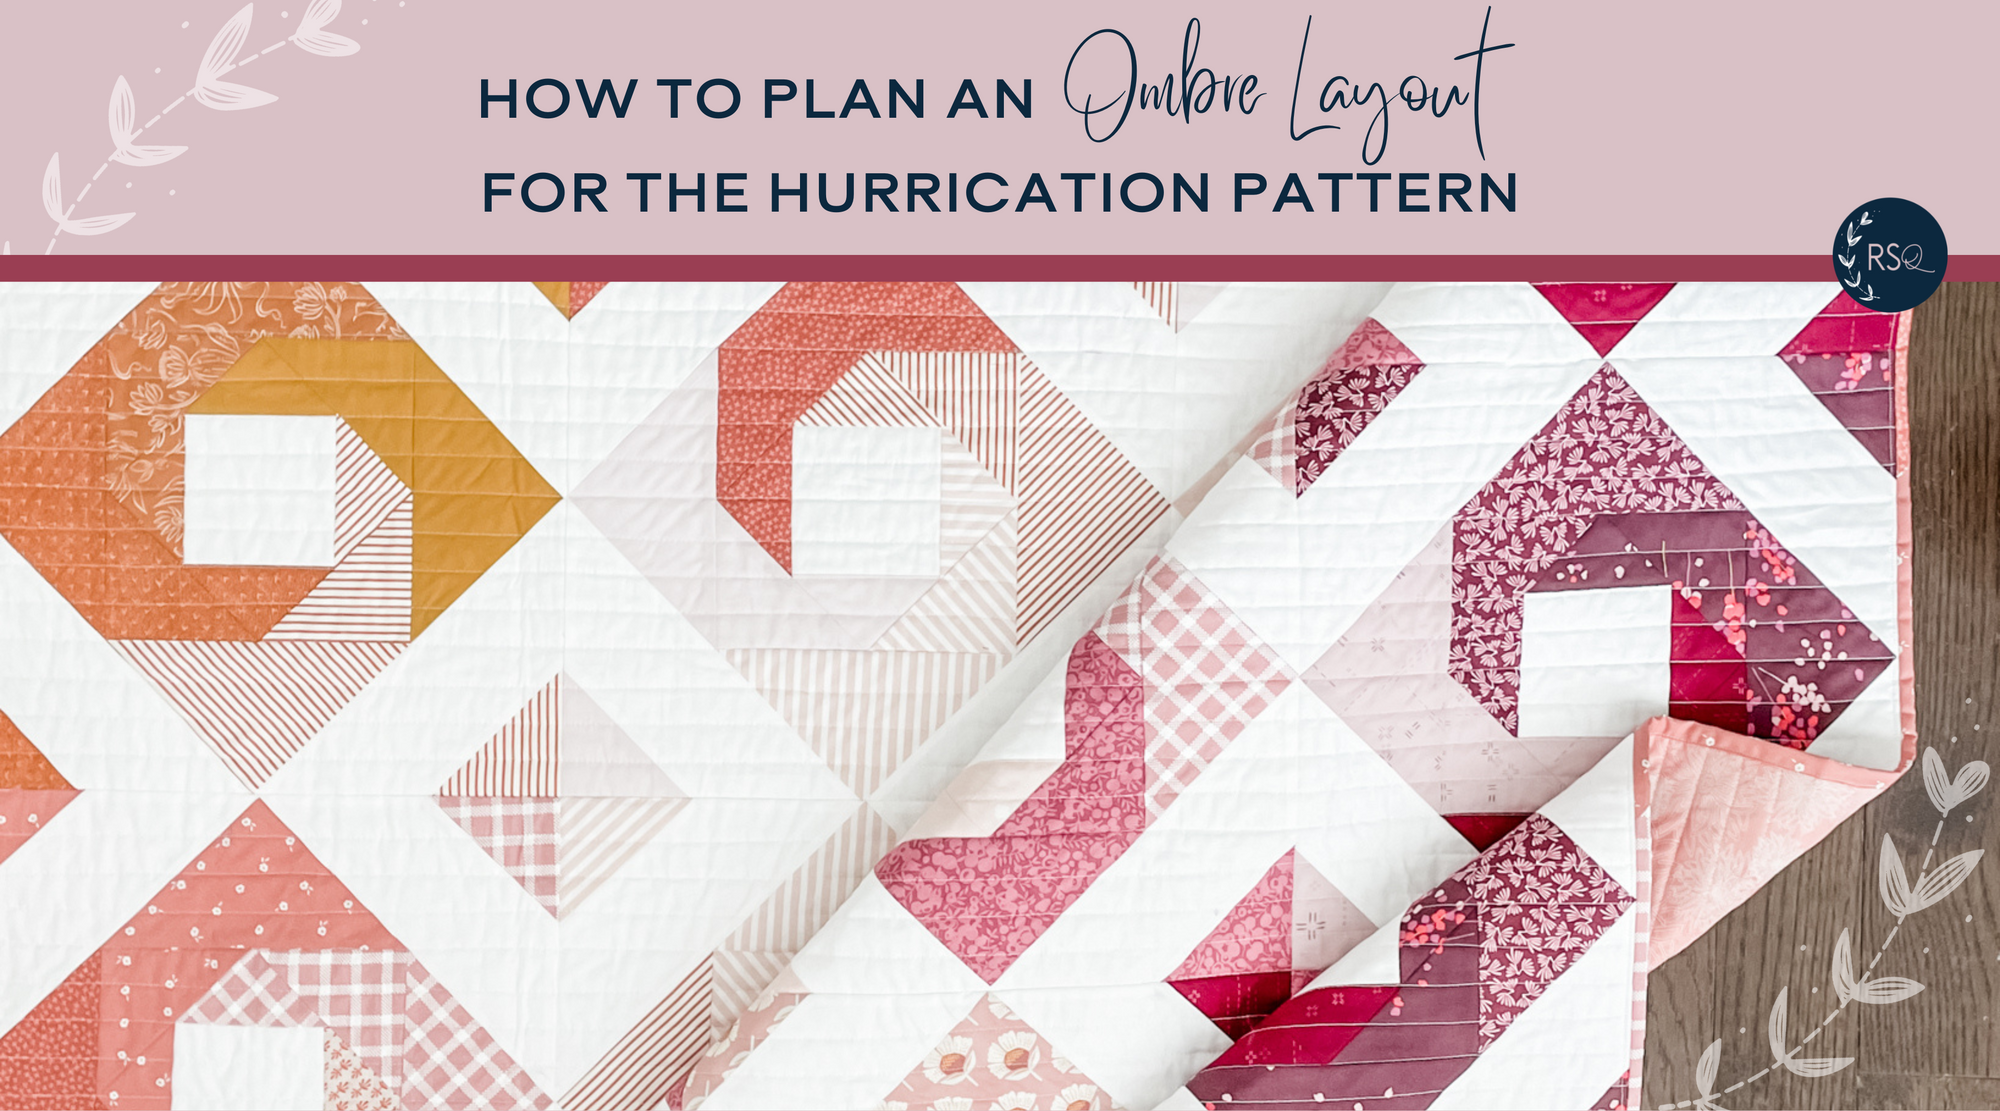 How to Plan an Ombre Layout for the Hurrication Pattern